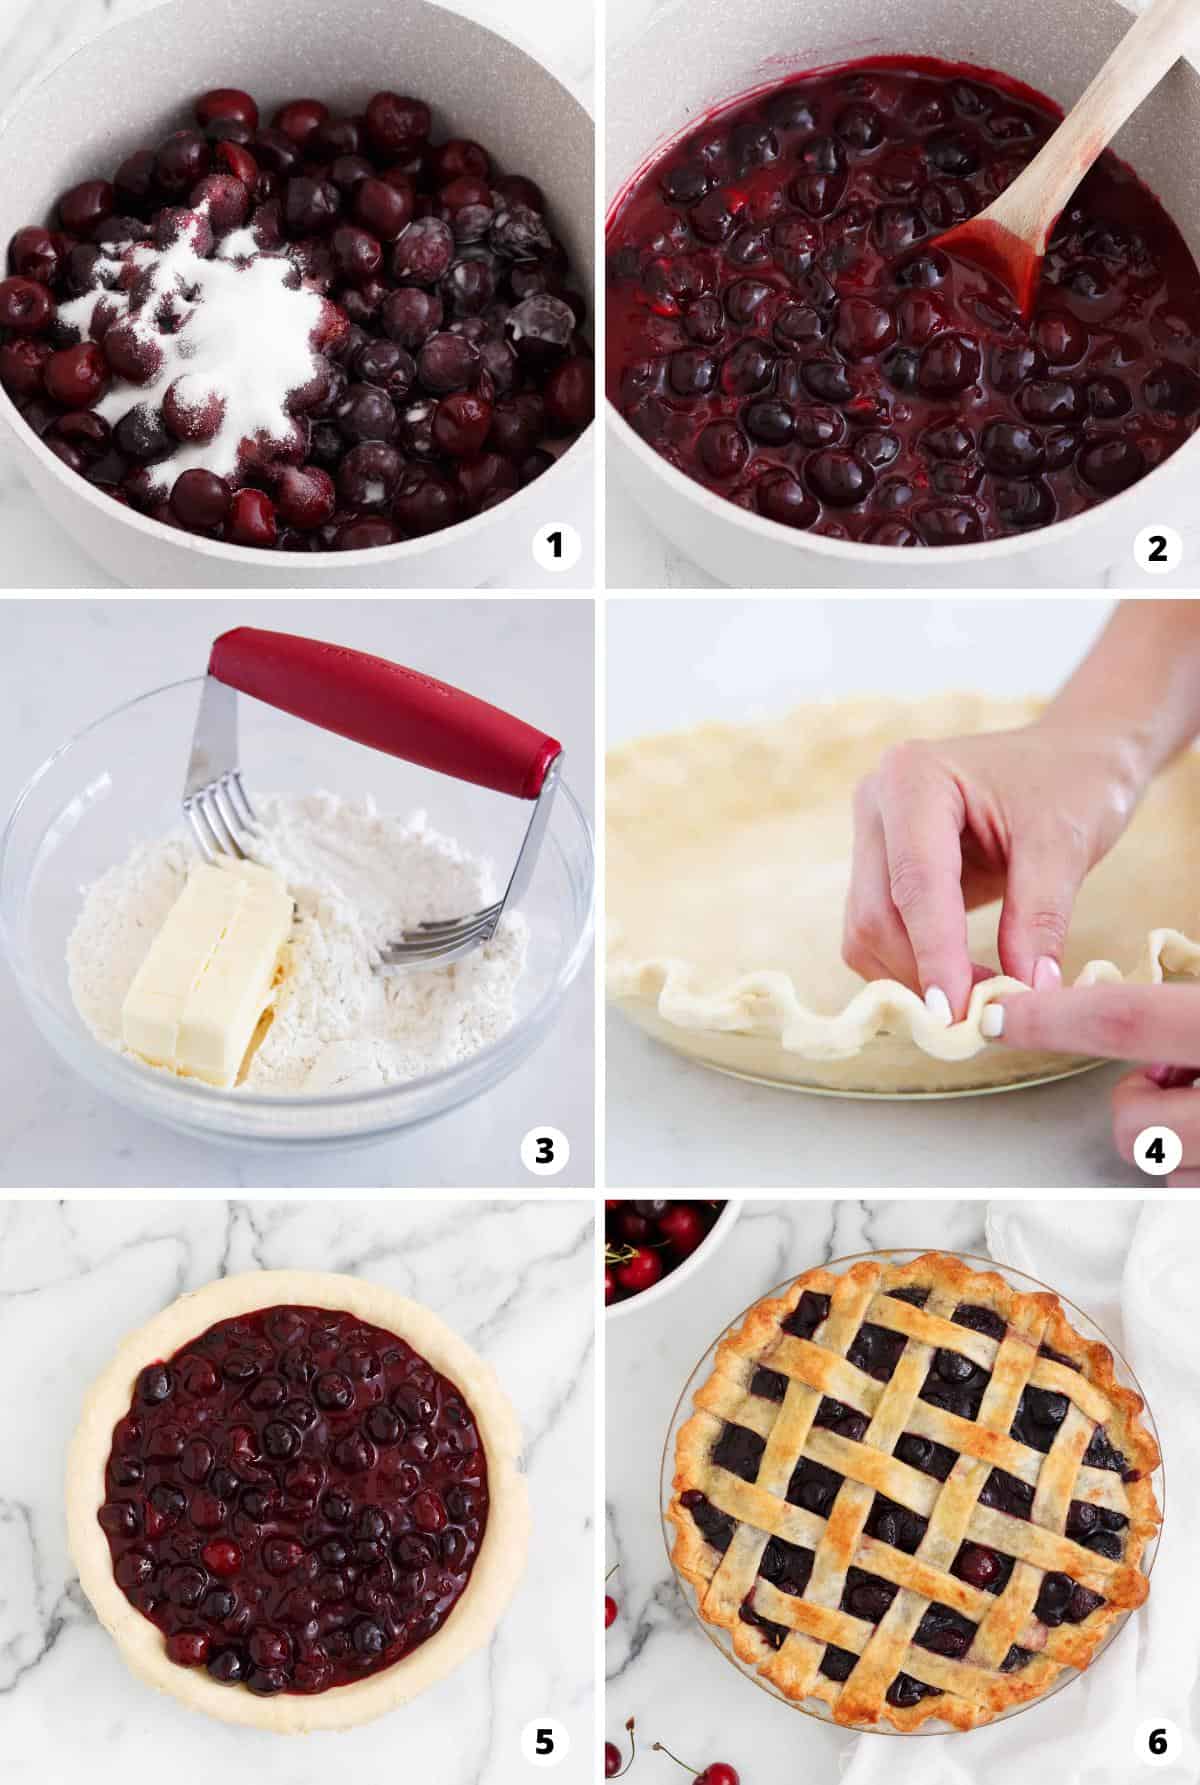 Showing how to make cherry pie in a 6 step collage.